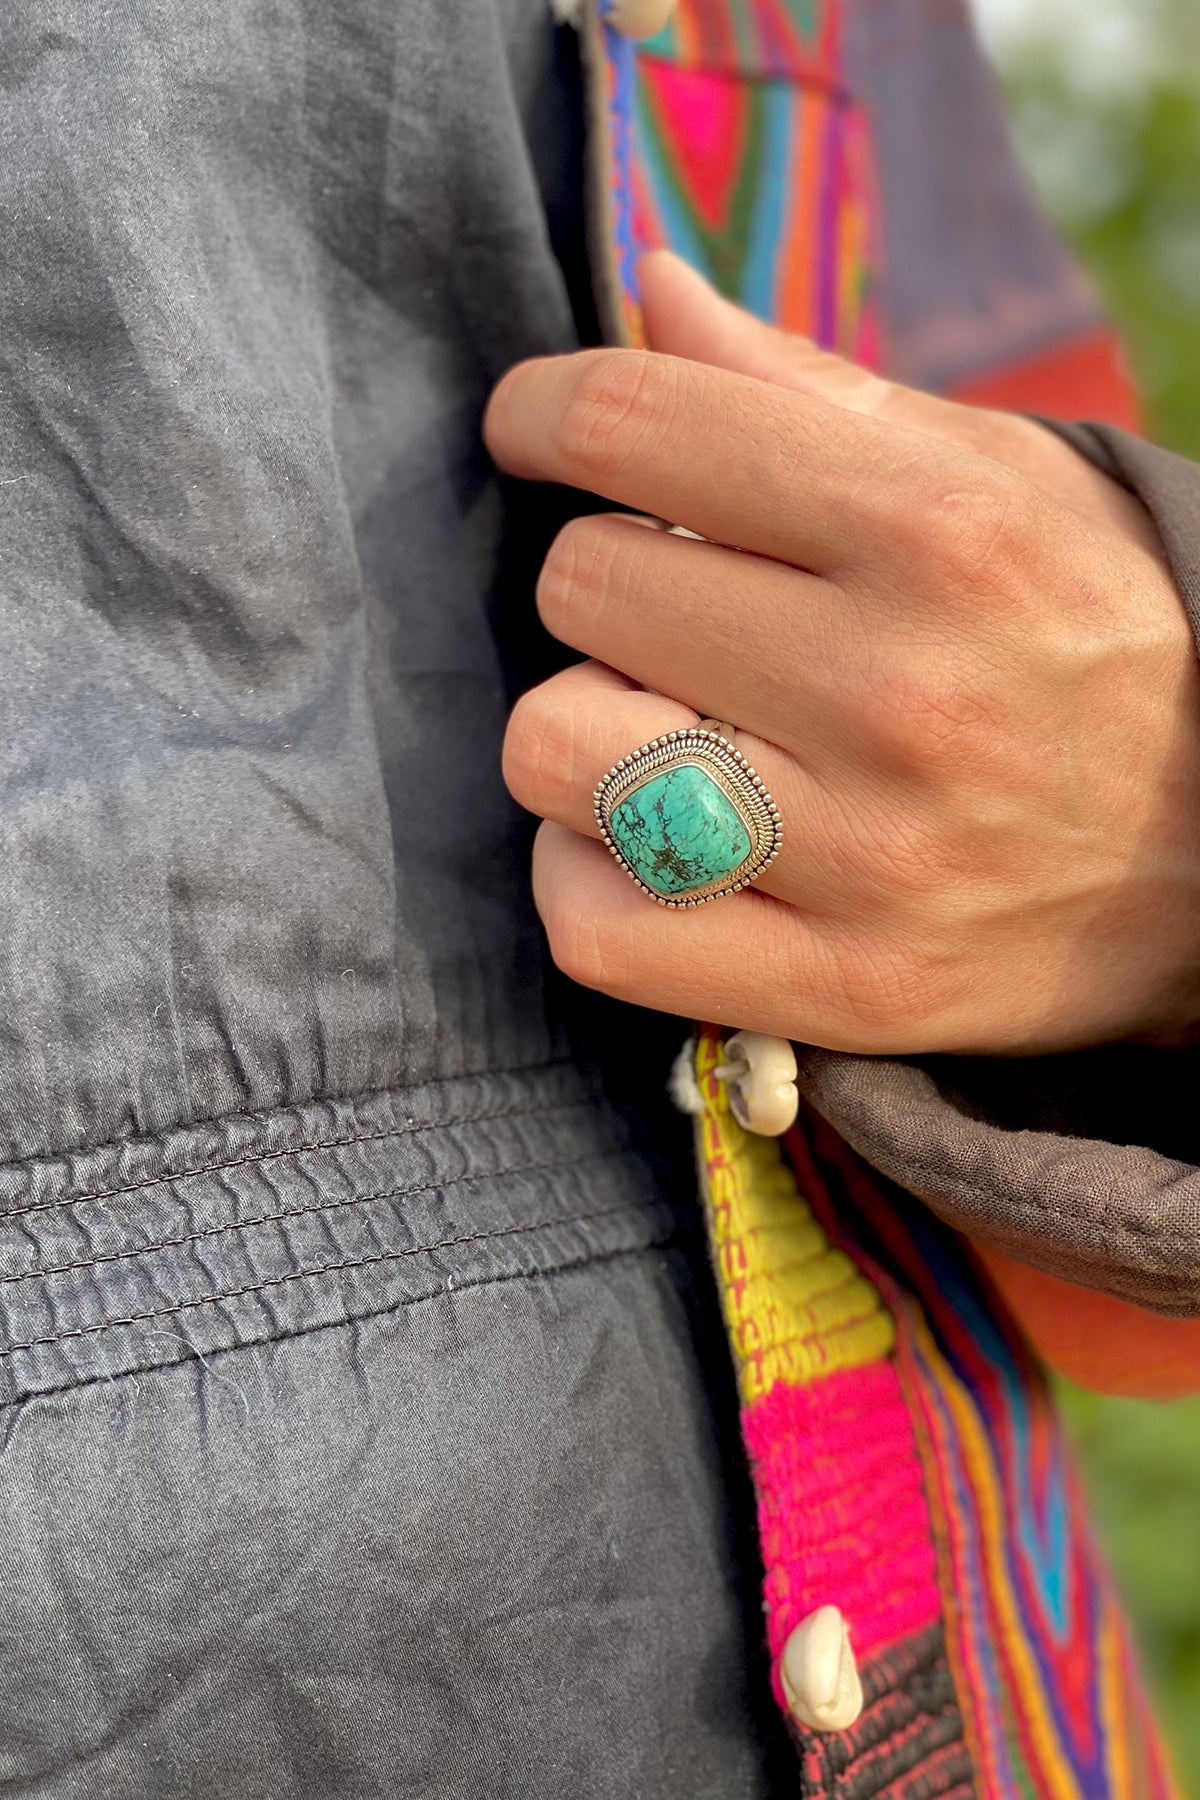 Buy Blue Copper Turquoise Ring, 925 Sterling Silver Ring Turquoise Men's  Ring, Statement Ring, Copper Turquoise Ring, Bohemian Ring Gift for Him  Online in India - Etsy